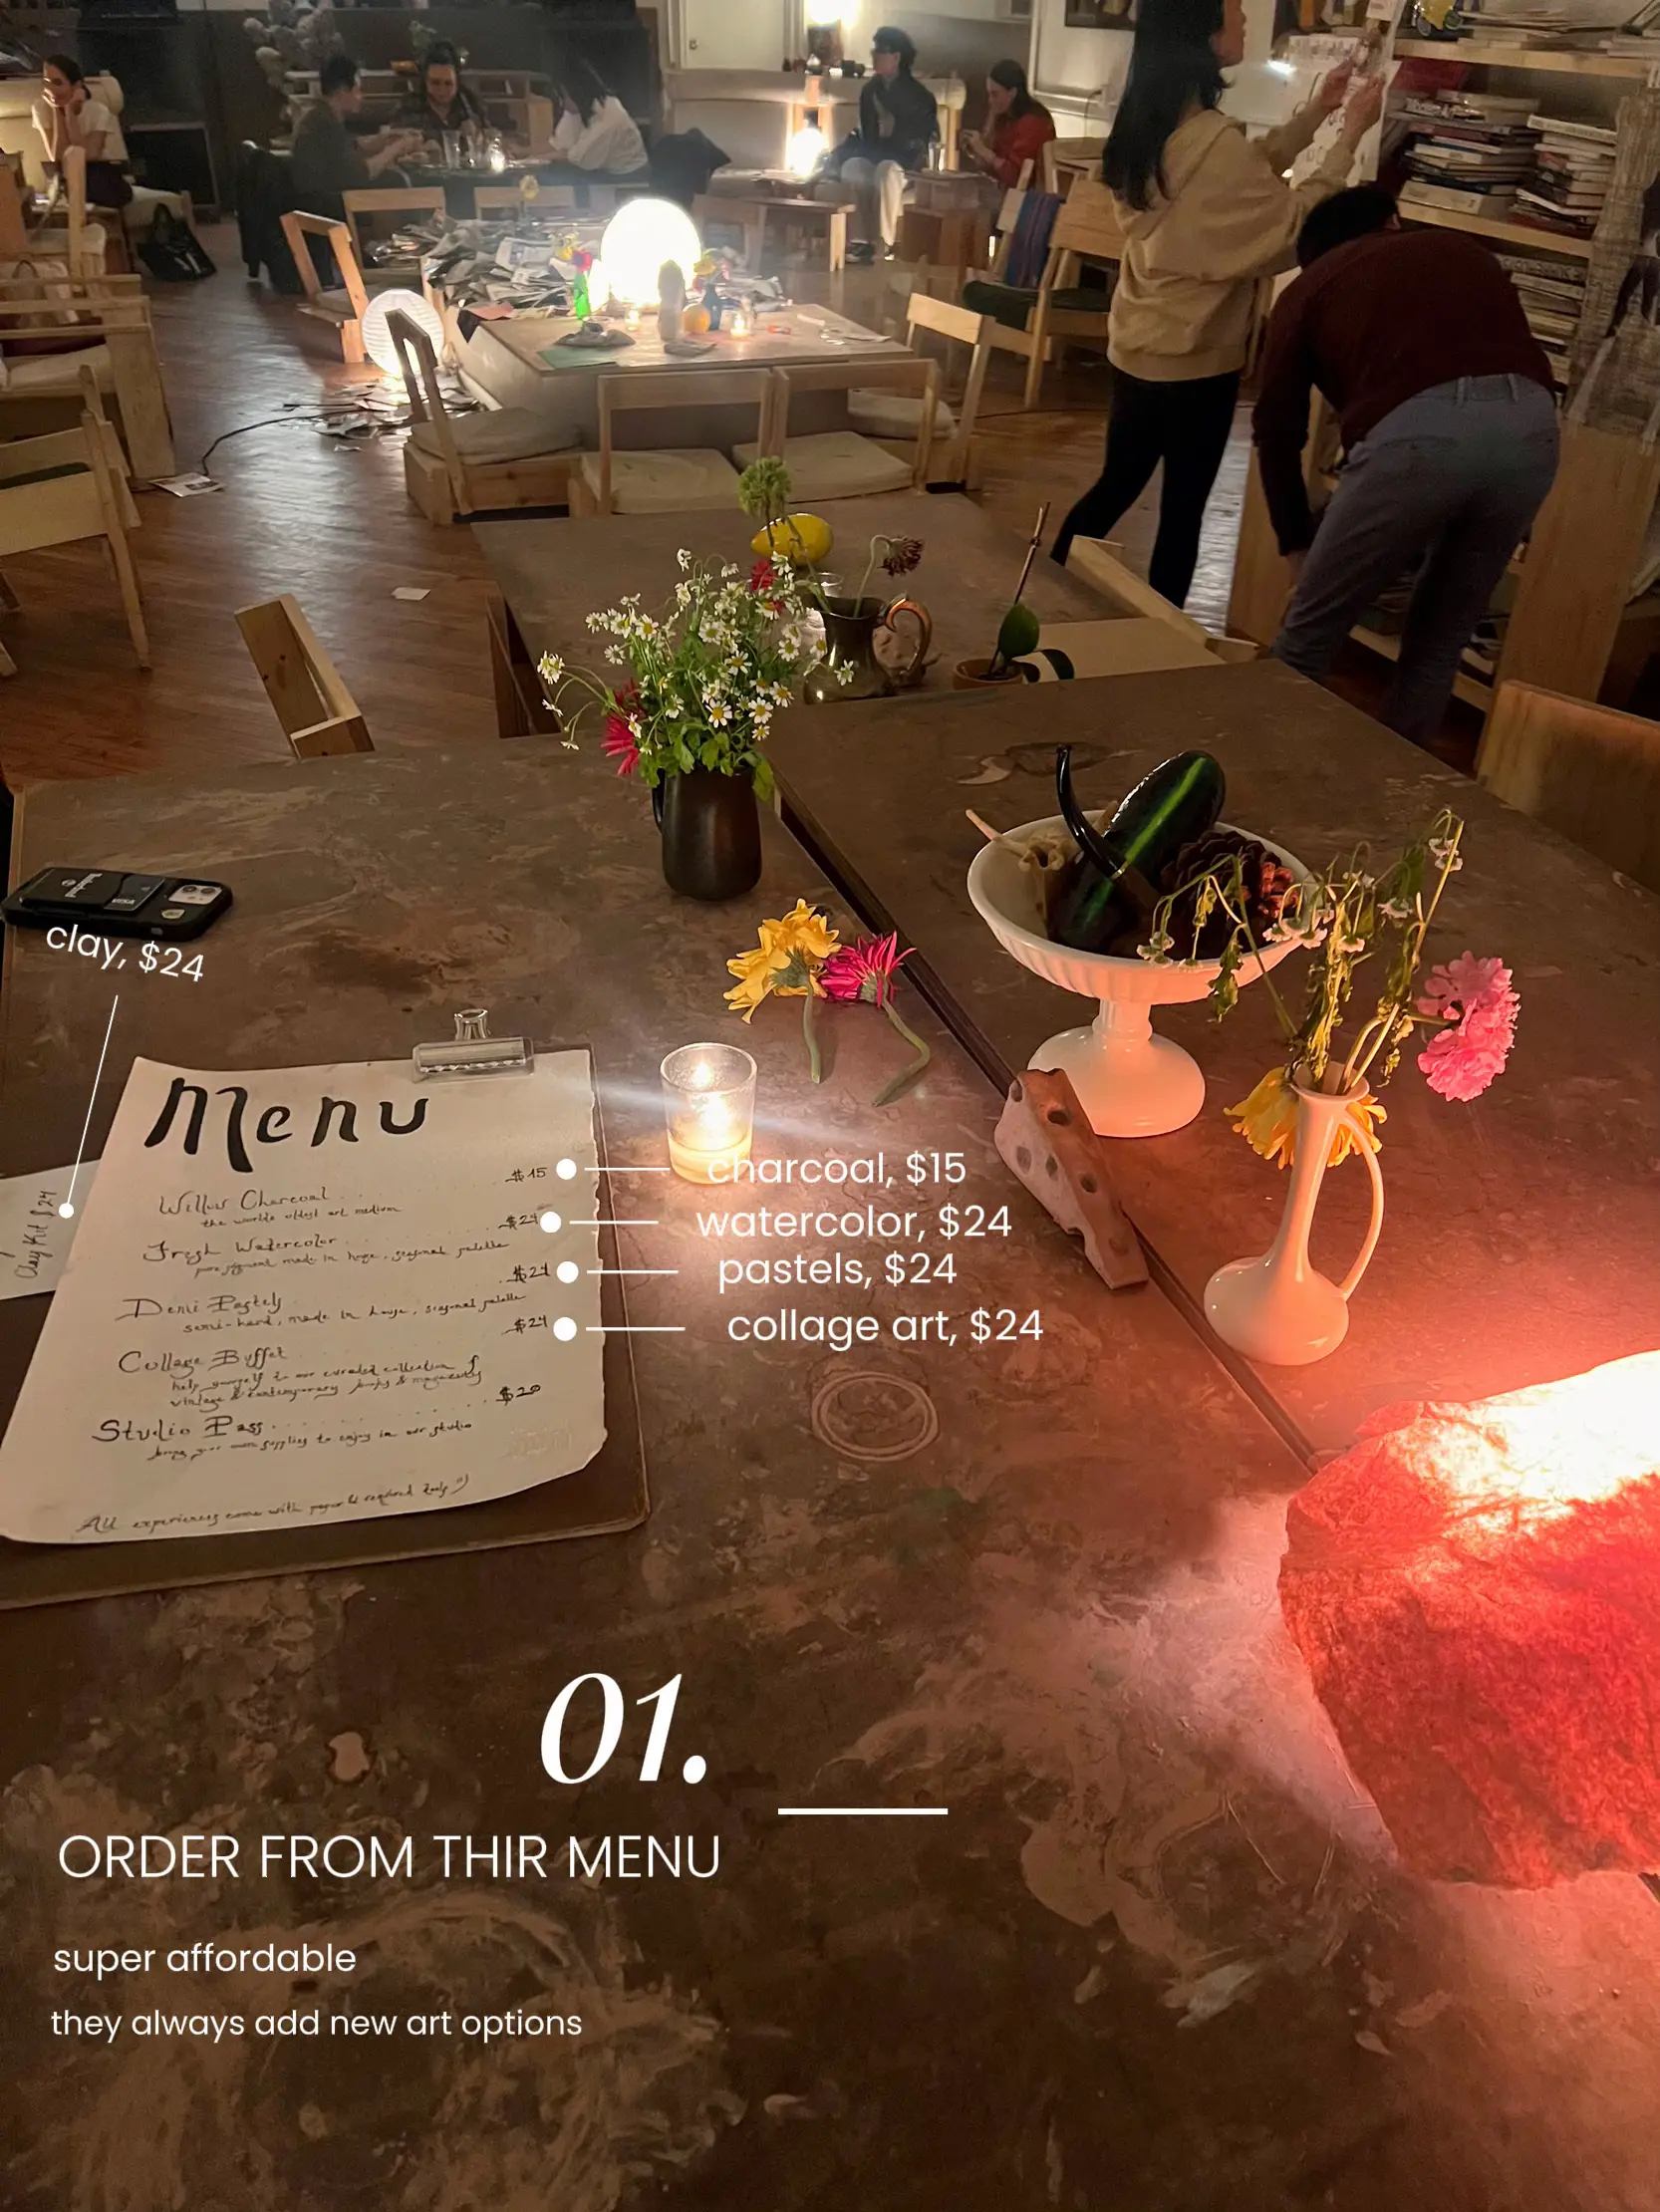  A table with a sign that says "01. ORDER